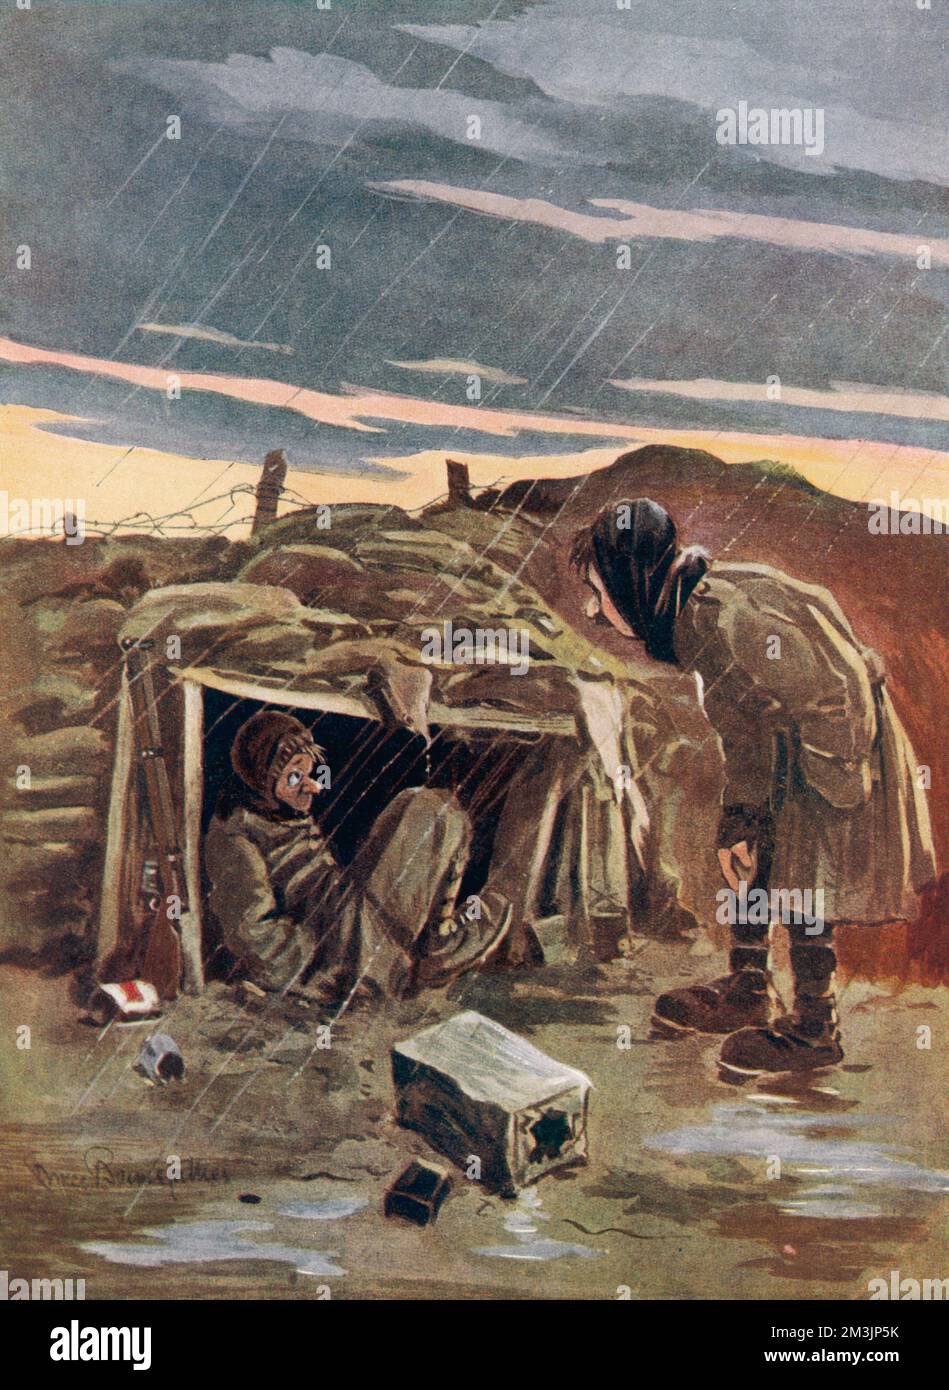 Humorous illustration by Bruce Bairnsfather showing a young soldier sheltering in his funk hole in a trench while an 'Ole Bill' type character observes his misery. Stock Photo